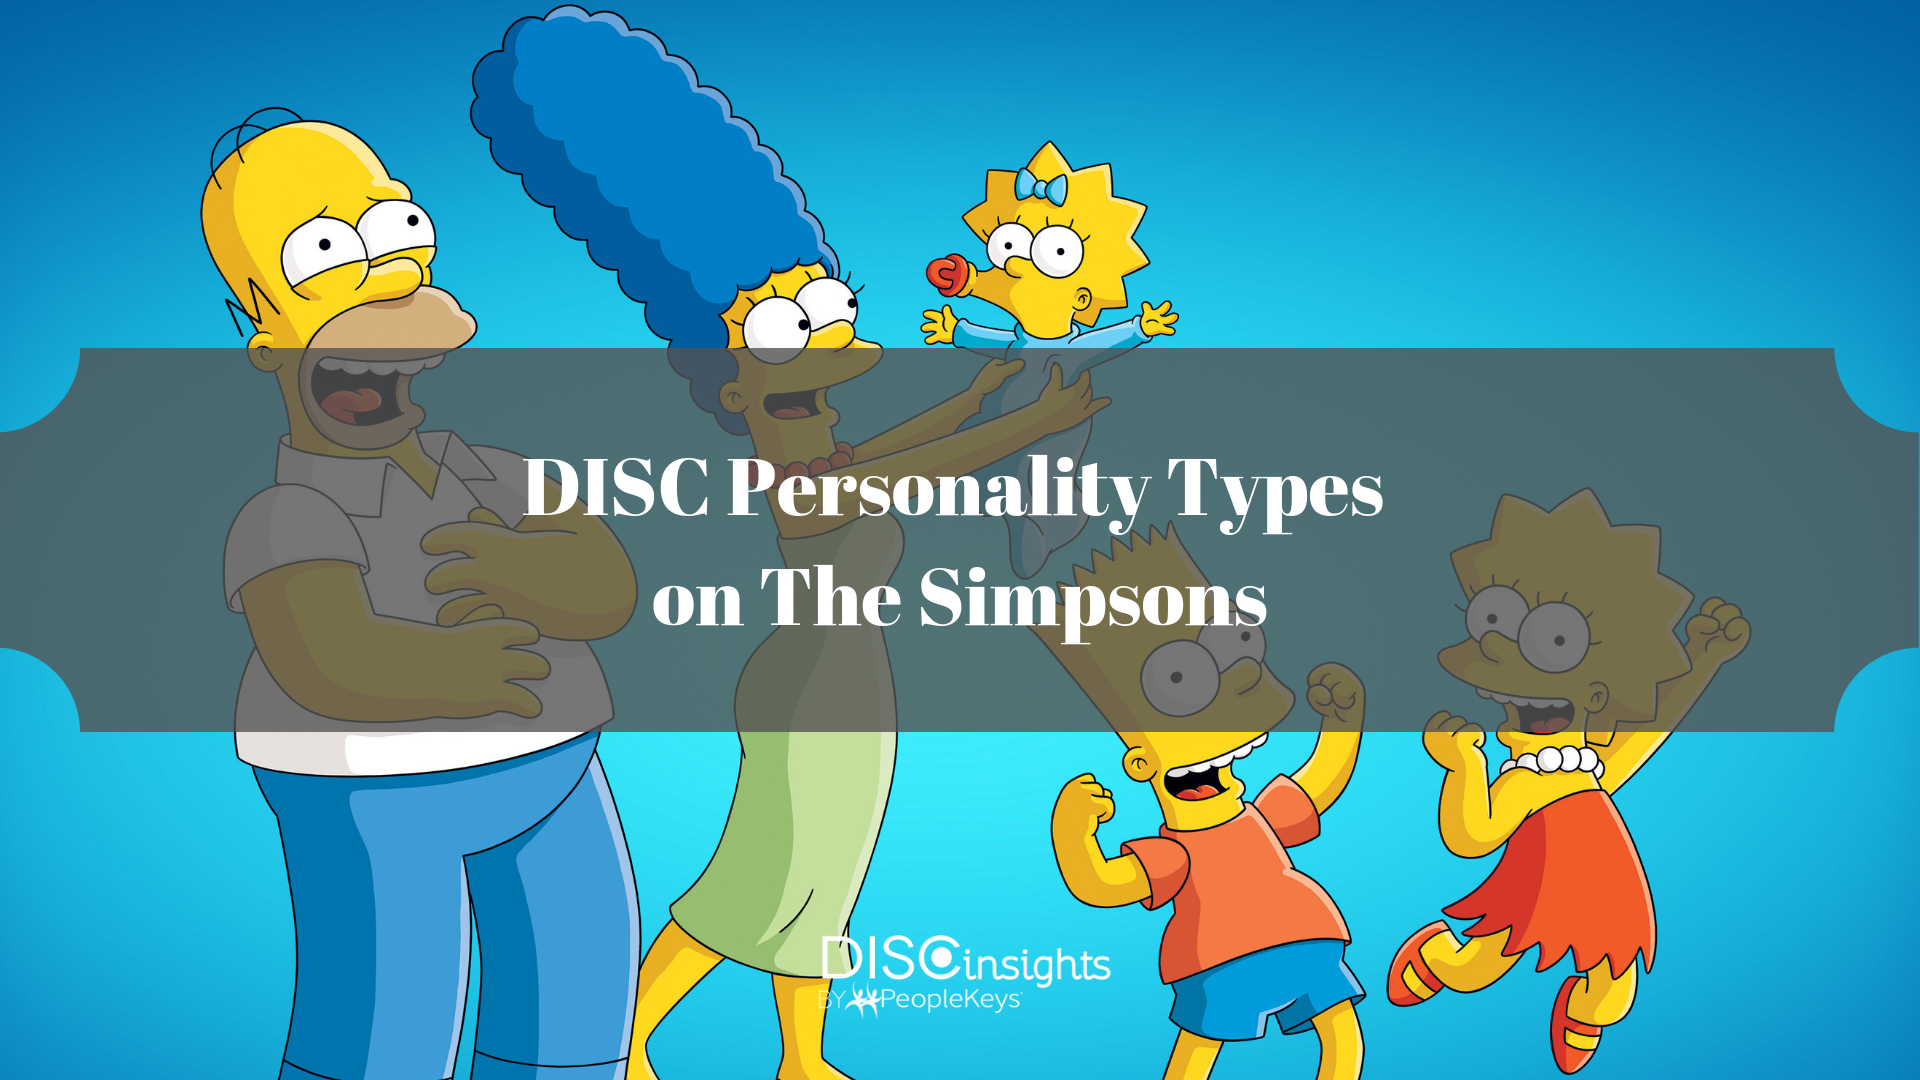 Disc Personality Types Of The Simpsons